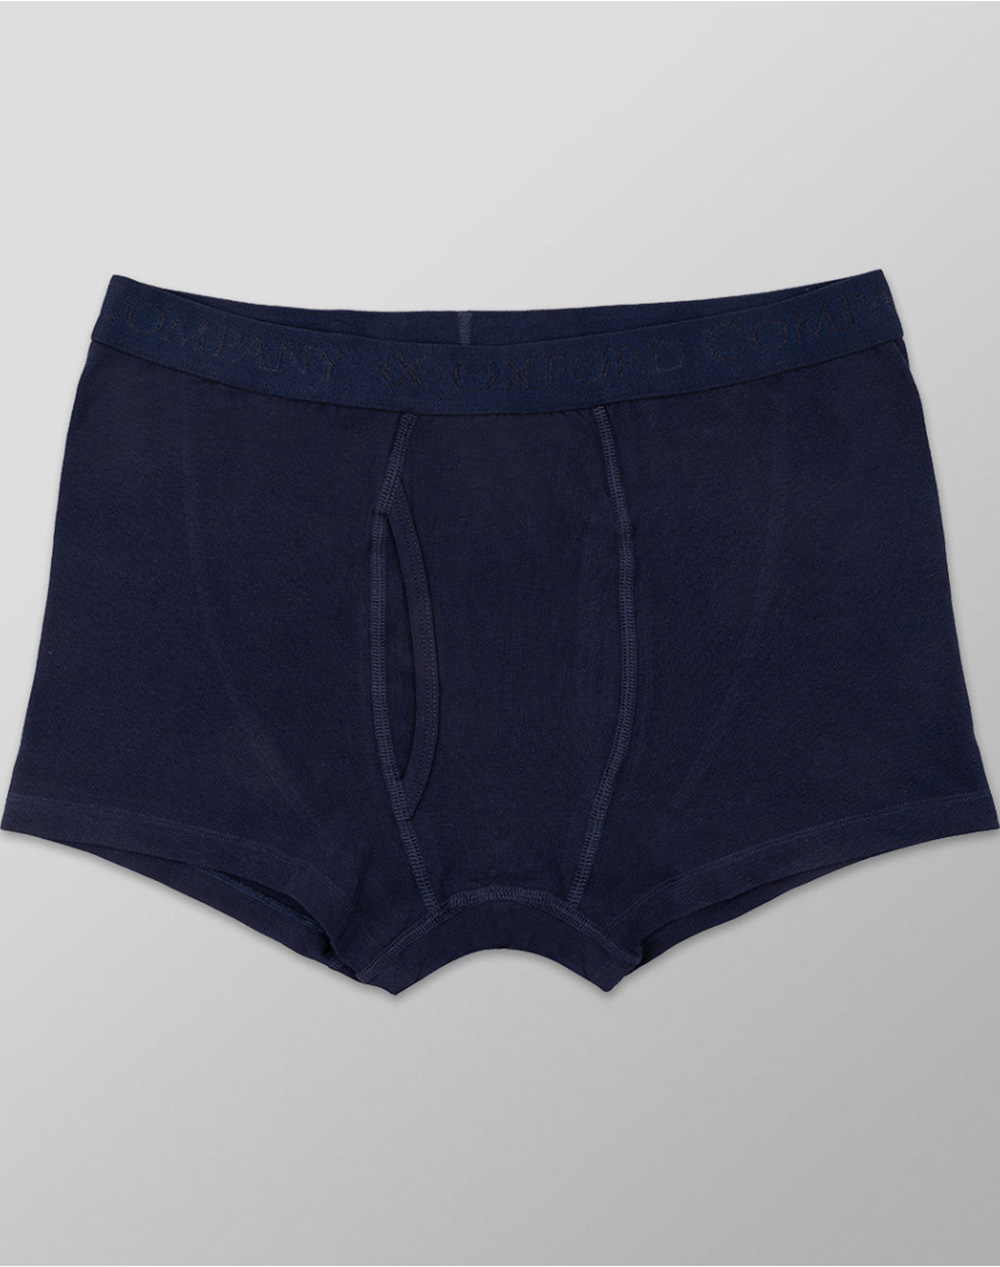 OXFORD COMPANY BOXER JERSEY LENJERIE INTINMA